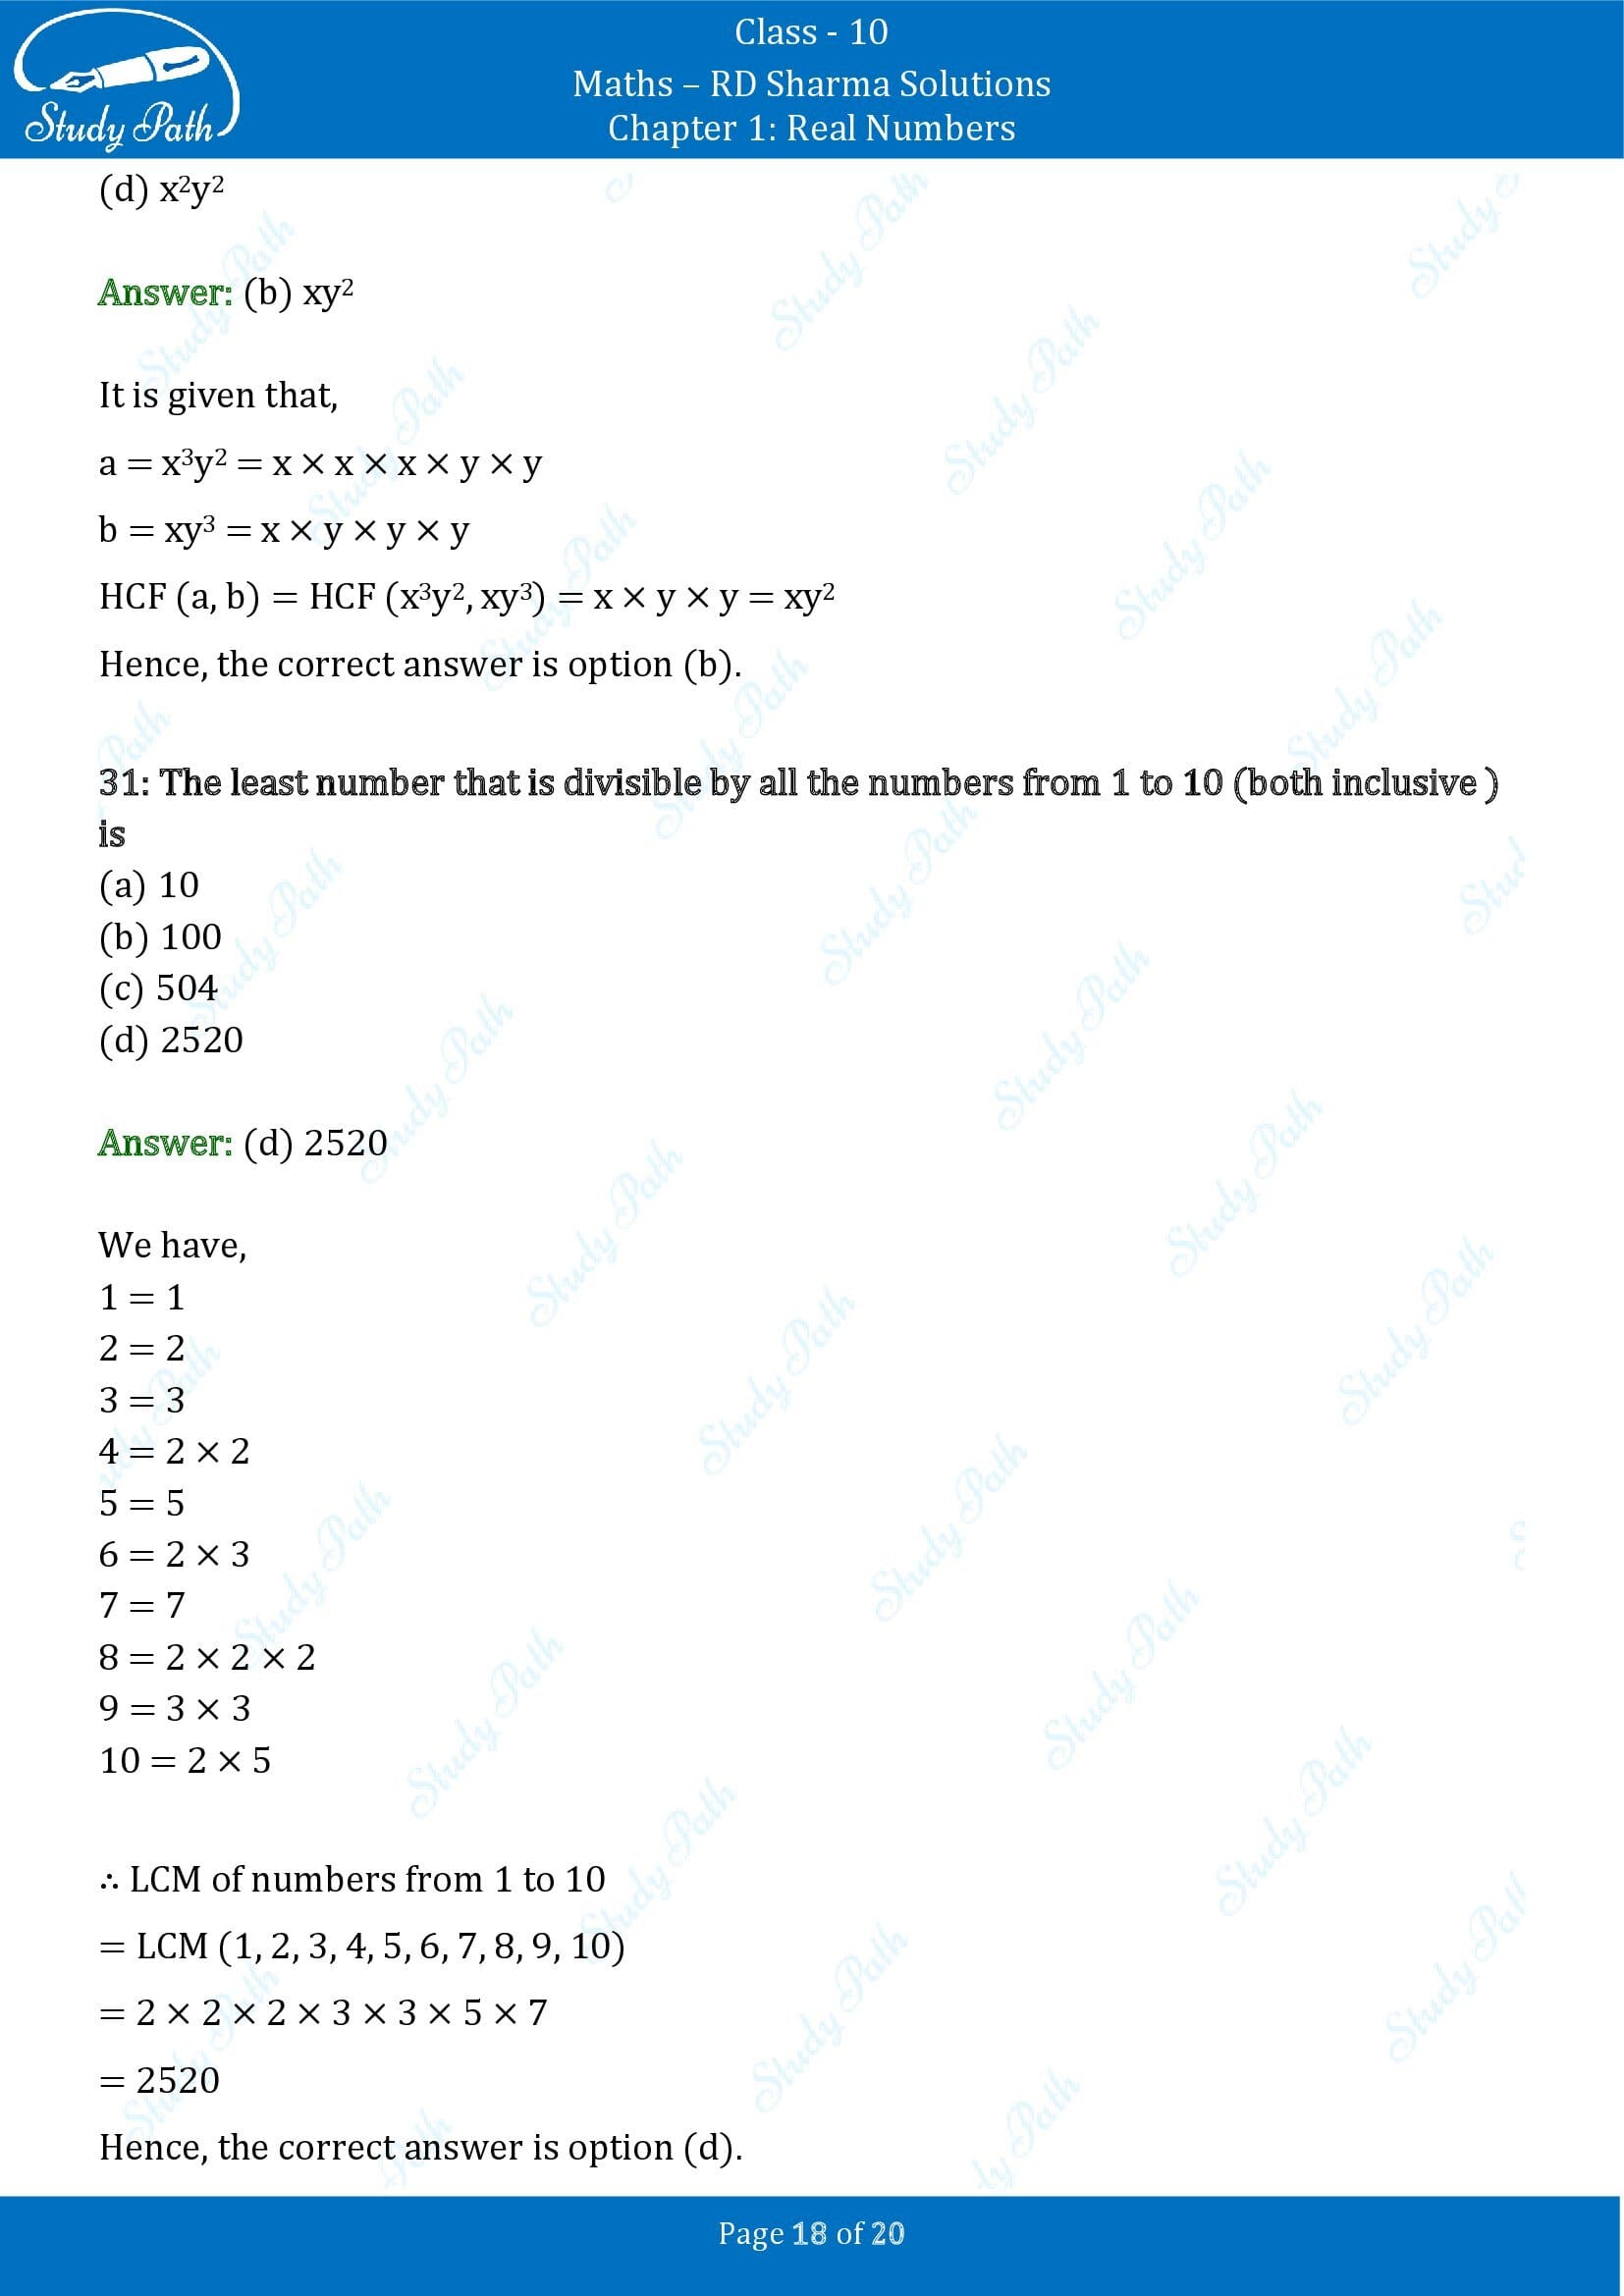 RD Sharma Solutions Class 10 Chapter 1 Real Numbers Multiple Choice Questions MCQs 00018